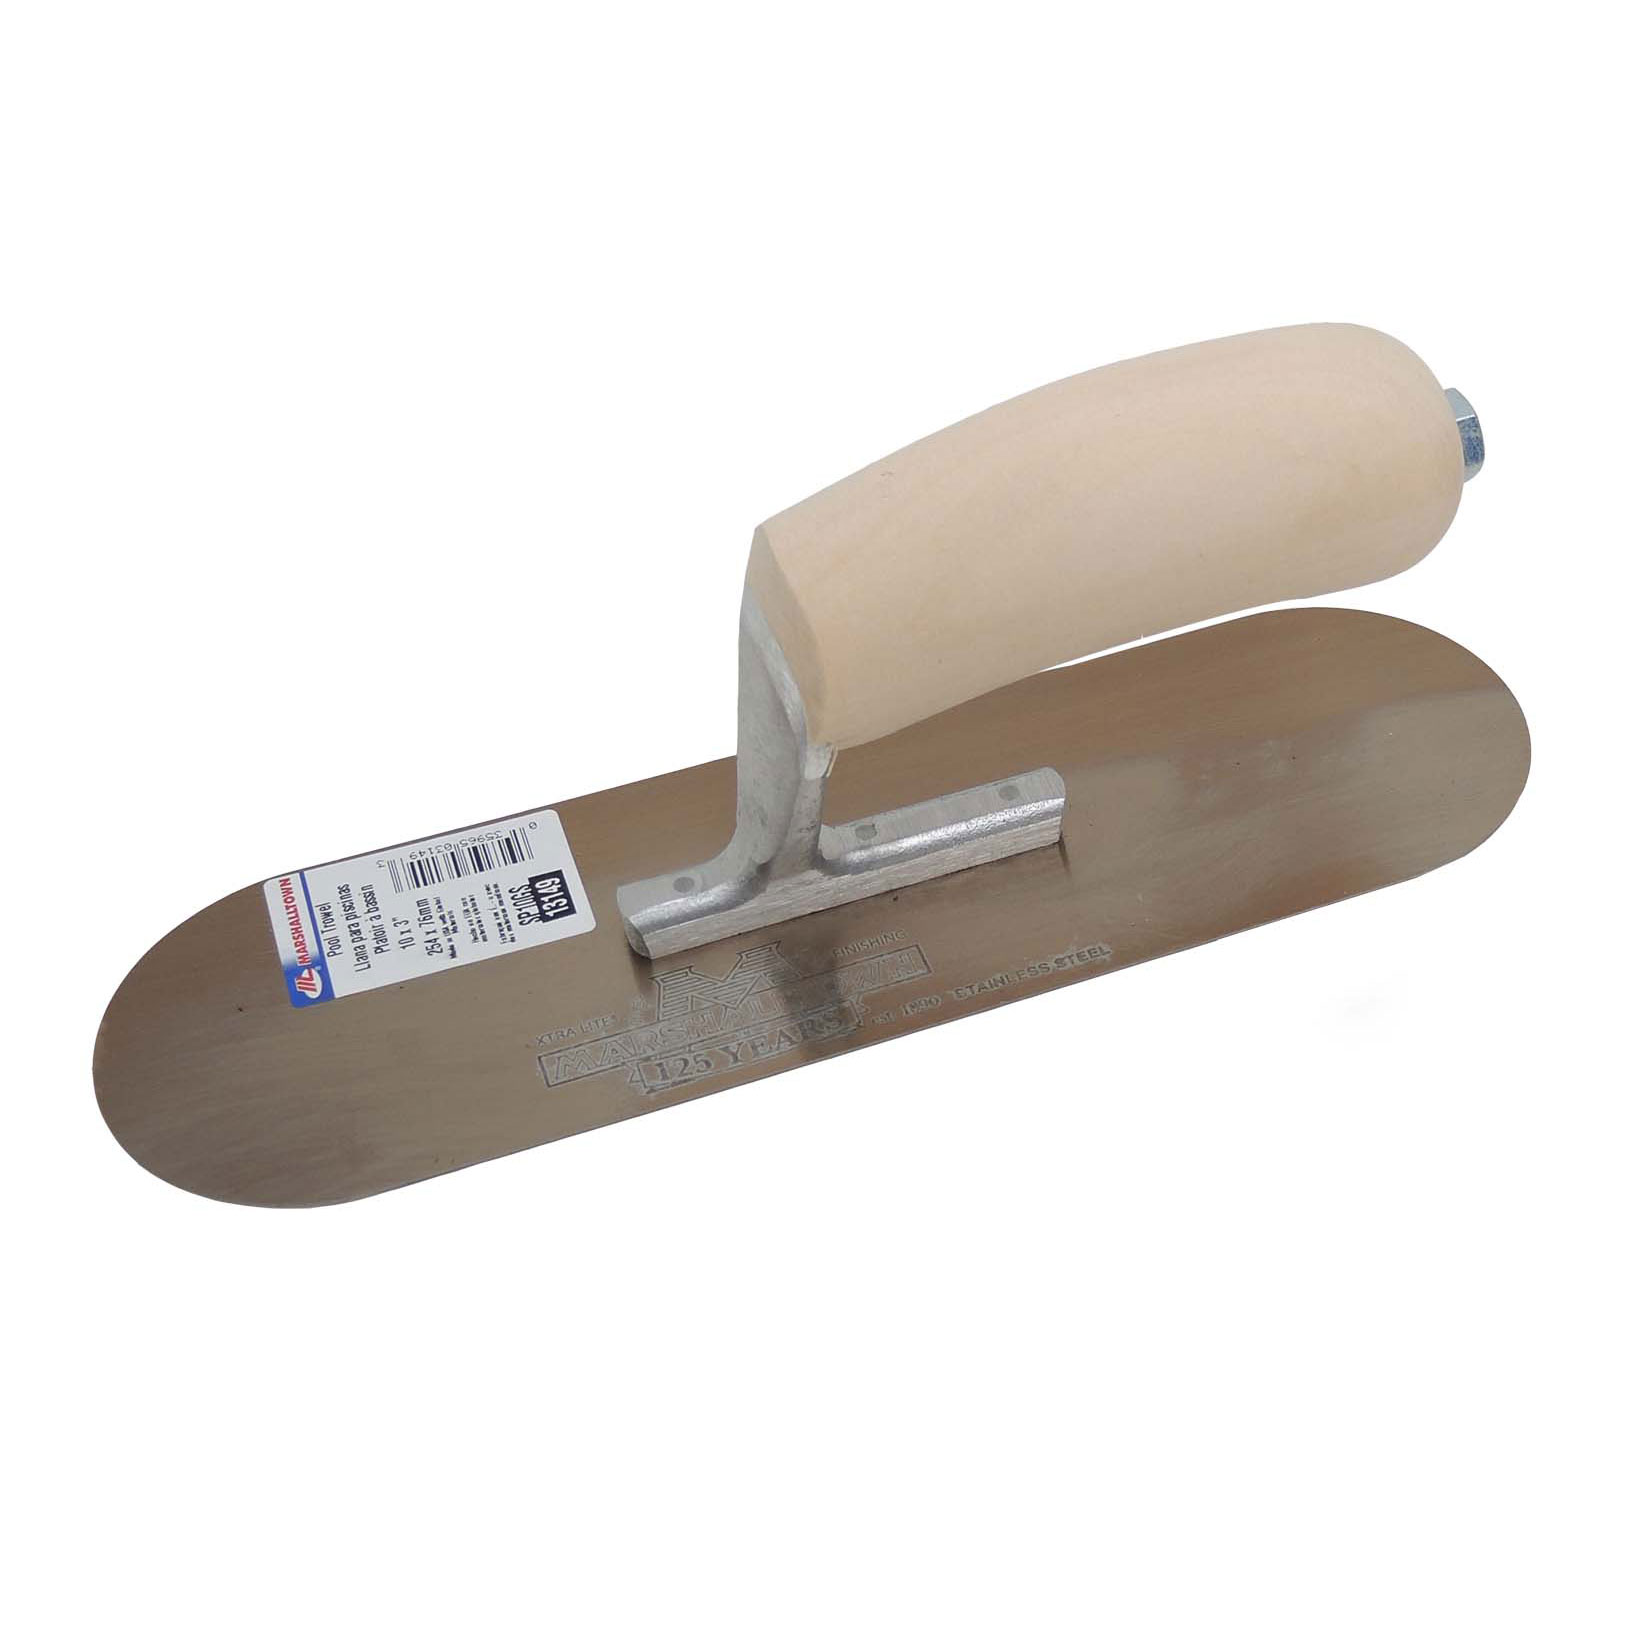 Marshalltown SP10GS 10in x 3in Golden Stainless-Steel Pool Trowel with Wood Handle SP10GS